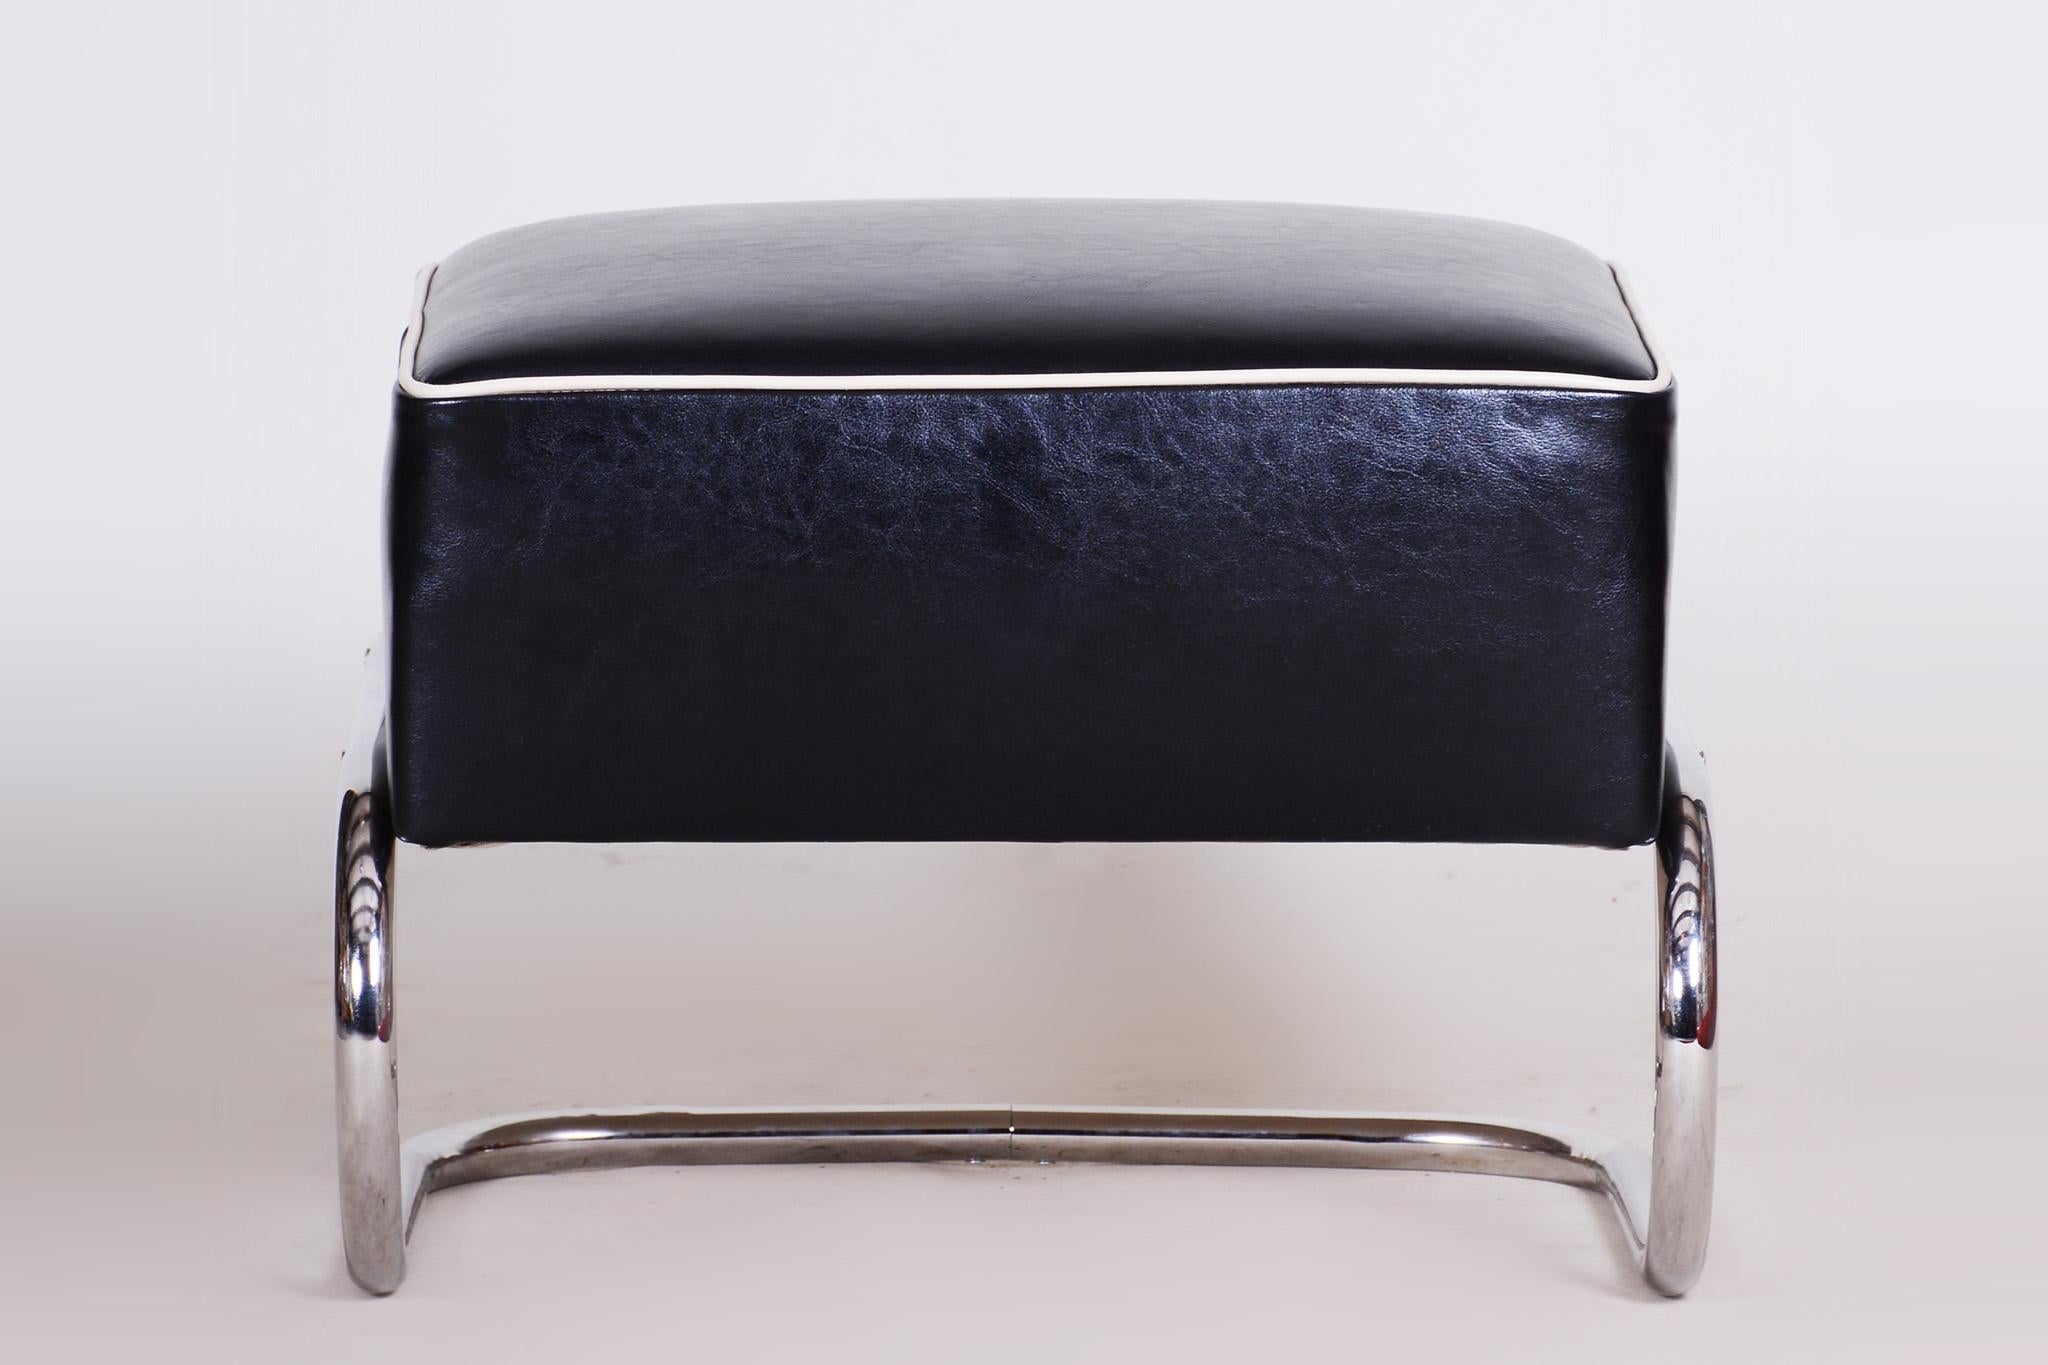 Bauhaus Black Leather Foot Stool, 1930s Czechia, Made by Slezák For Sale